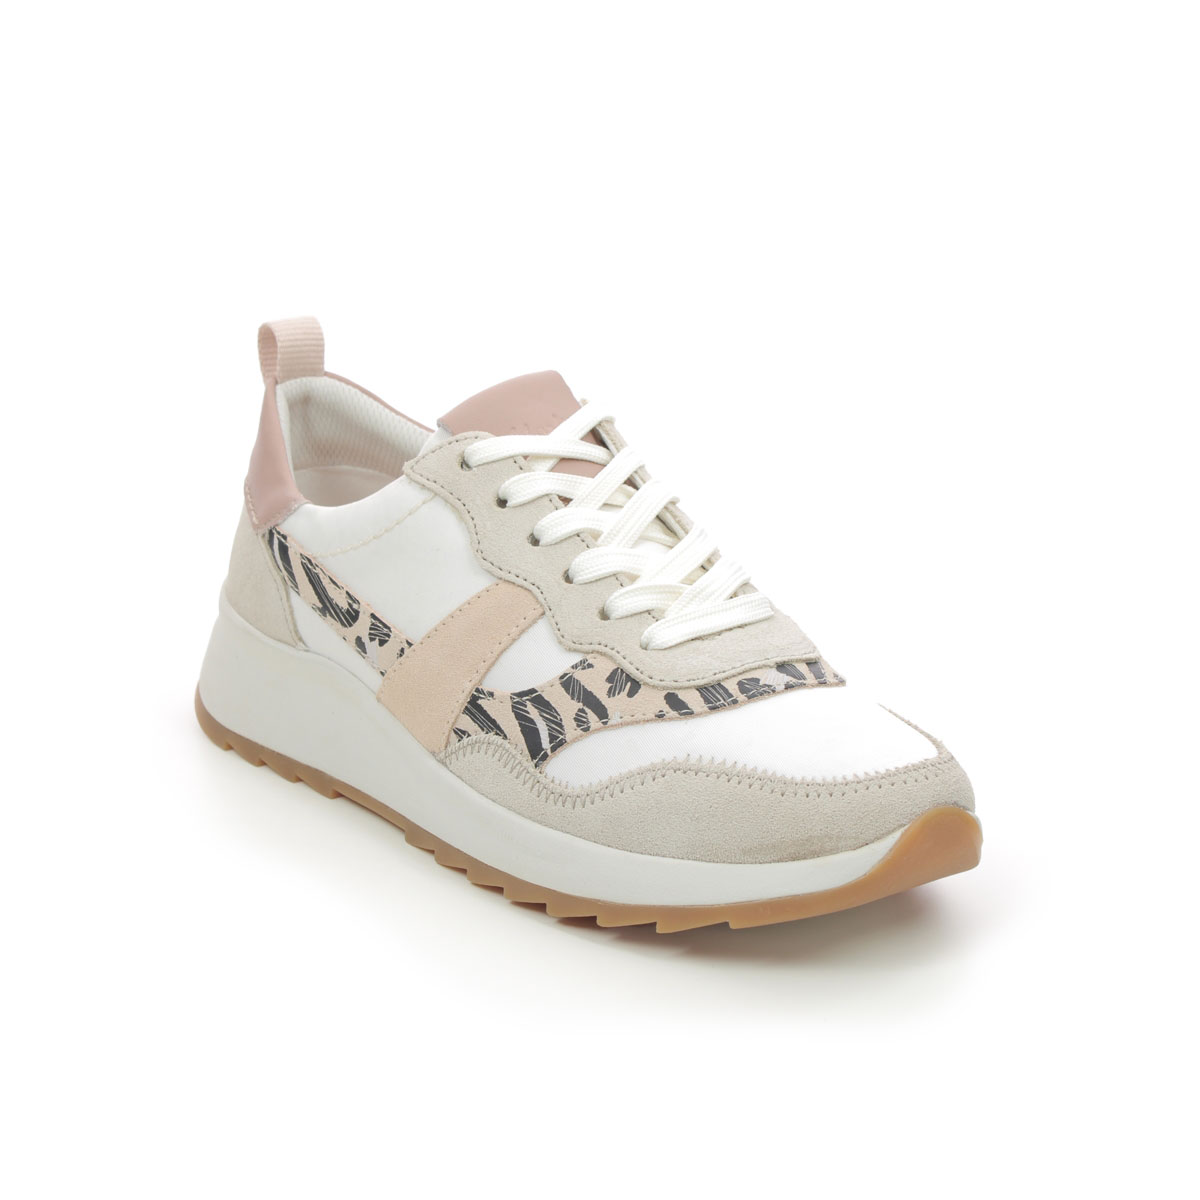 Clarks Dashlite Jazz White Pink Womens Trainers 704294D In Size 6 In Plain White Pink